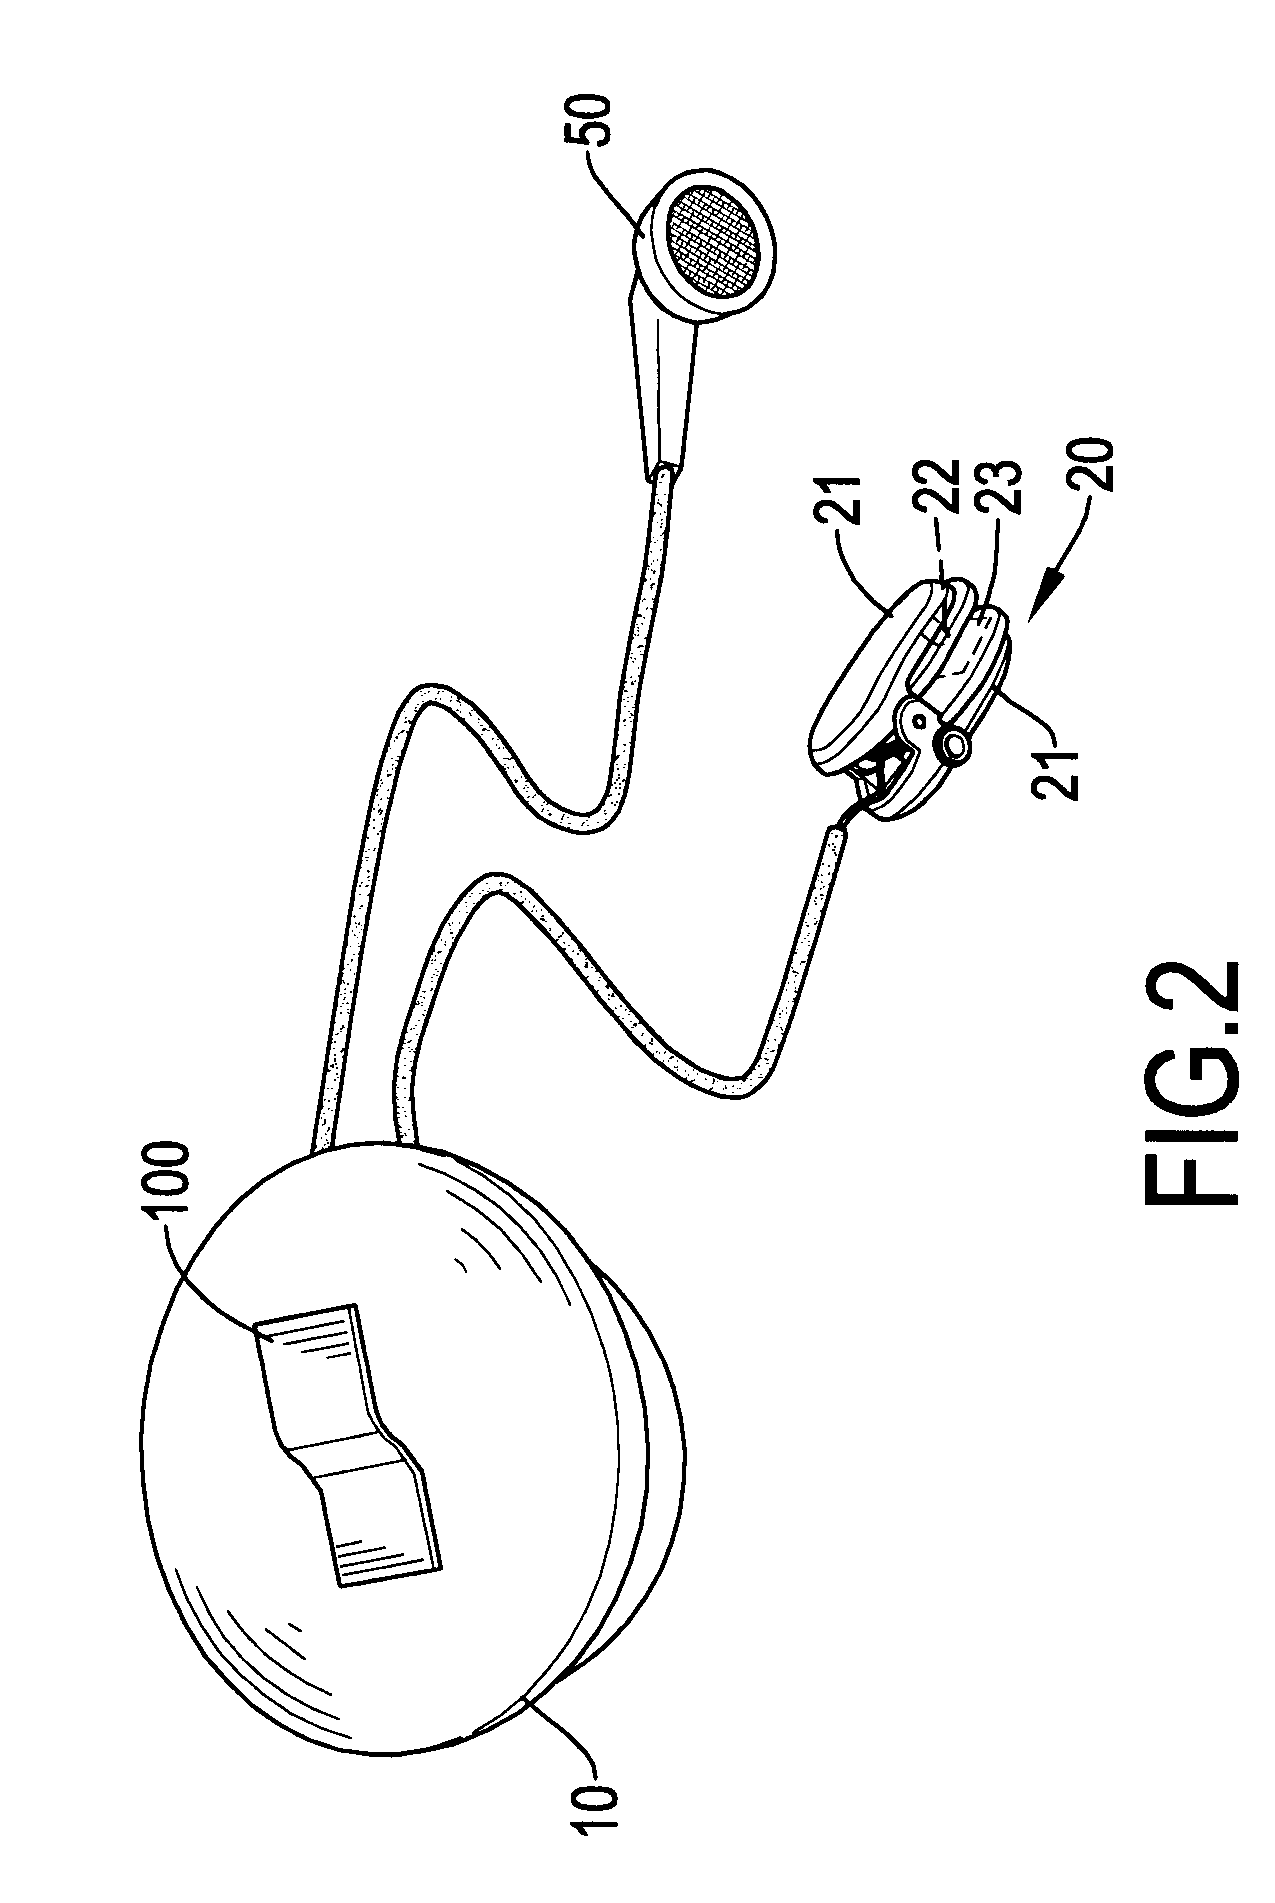 Exercise auxiliary device